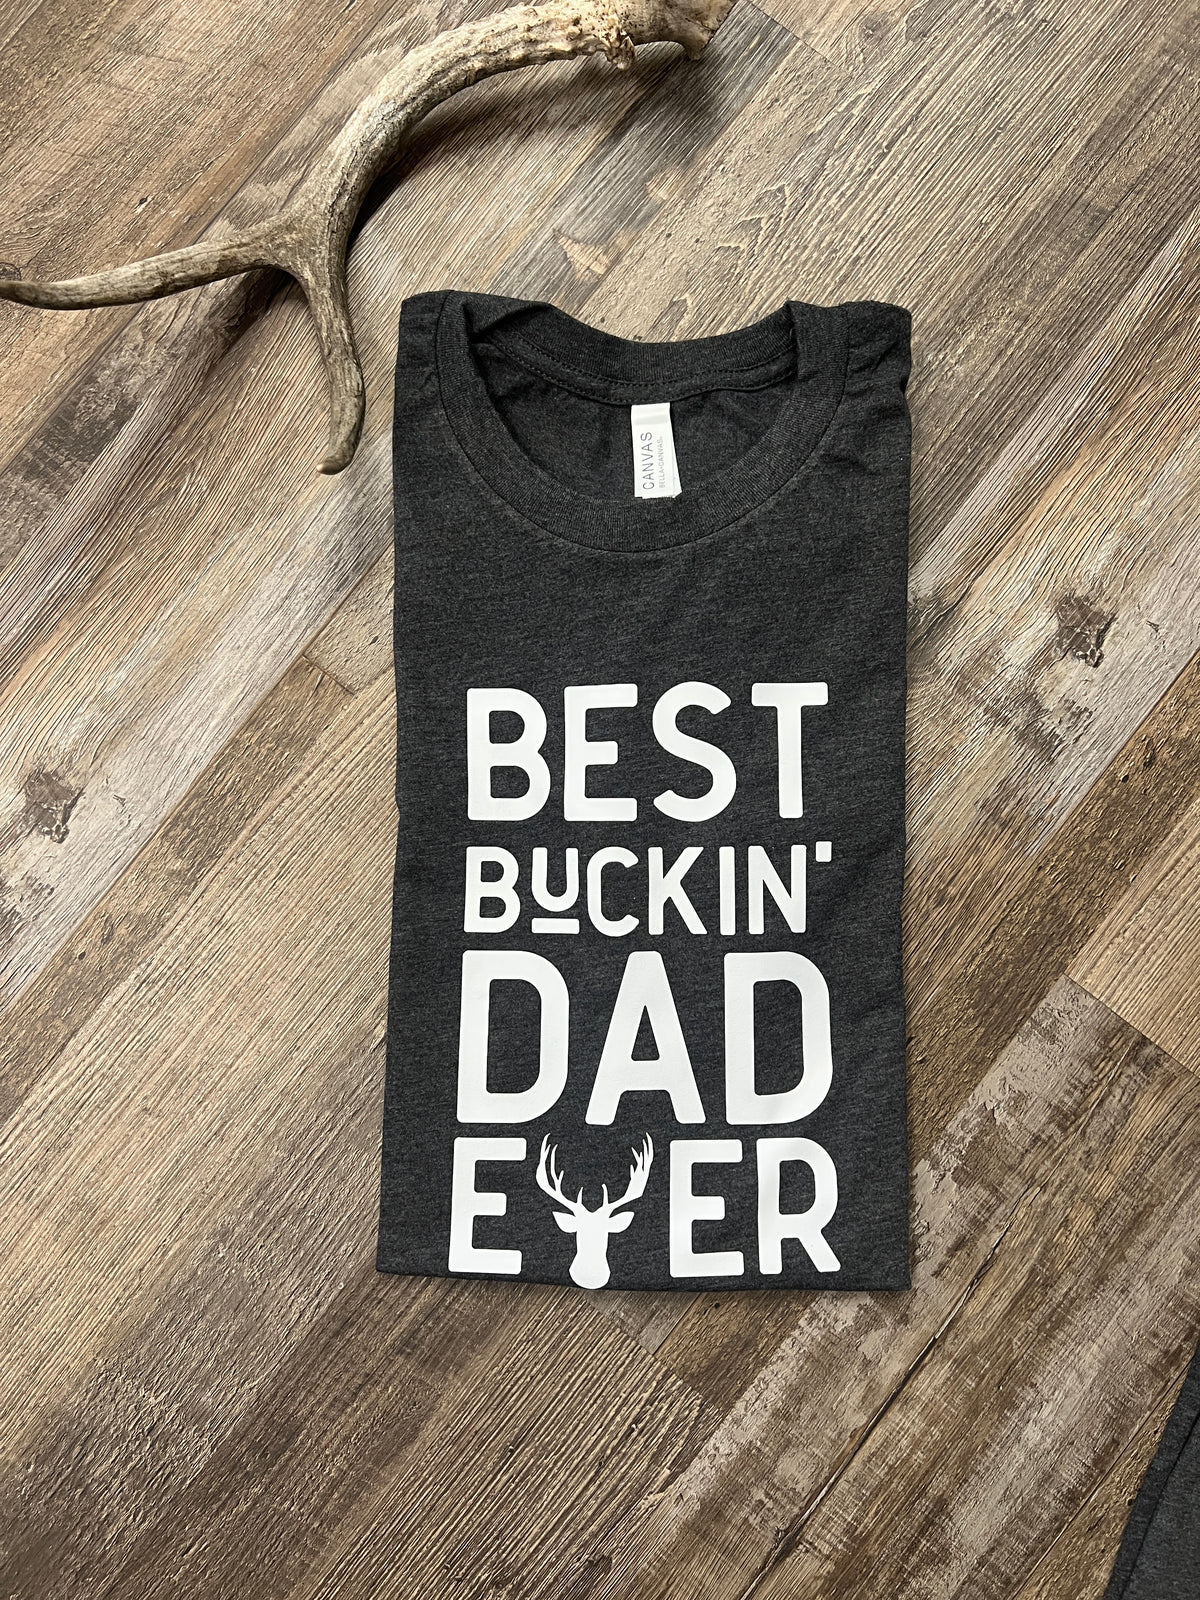 BEST BUCKIN' TEE (FOR THE WHOLE FAMILY!)